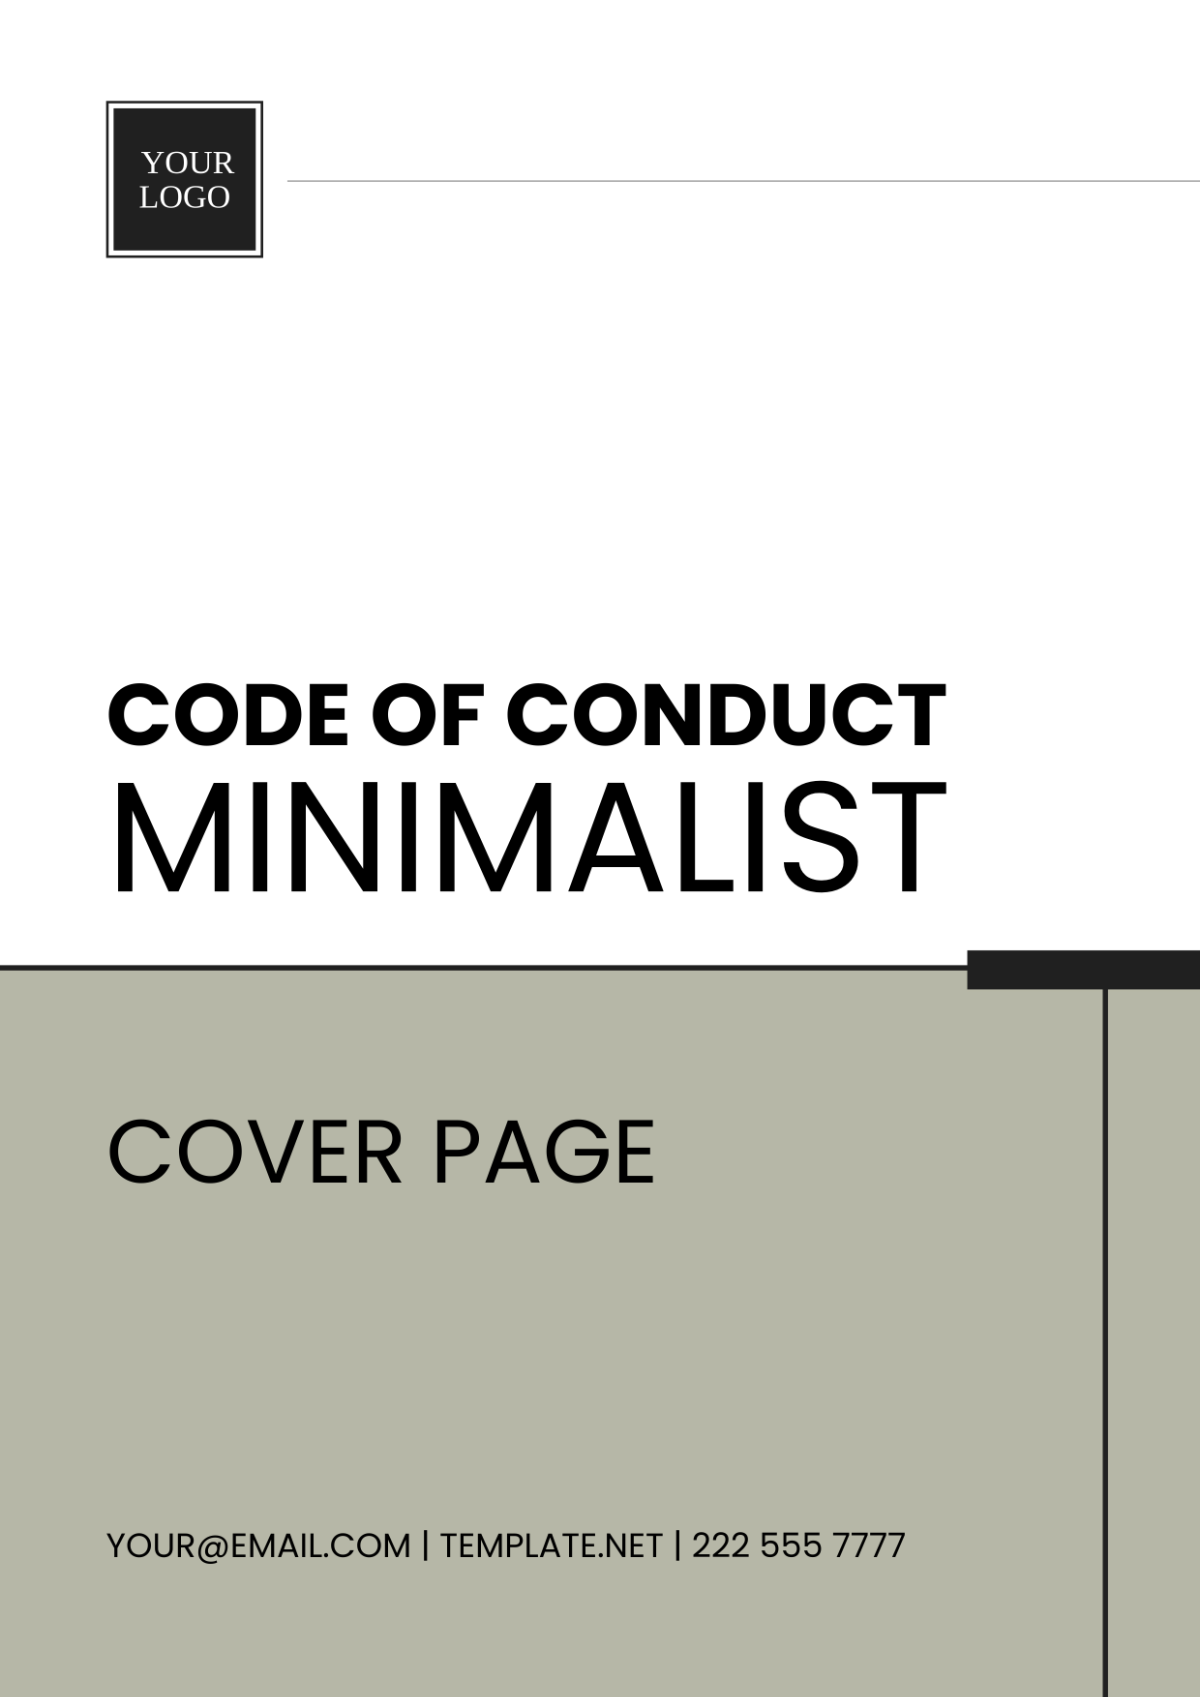 Code of Conduct Minimalist Cover Page Template